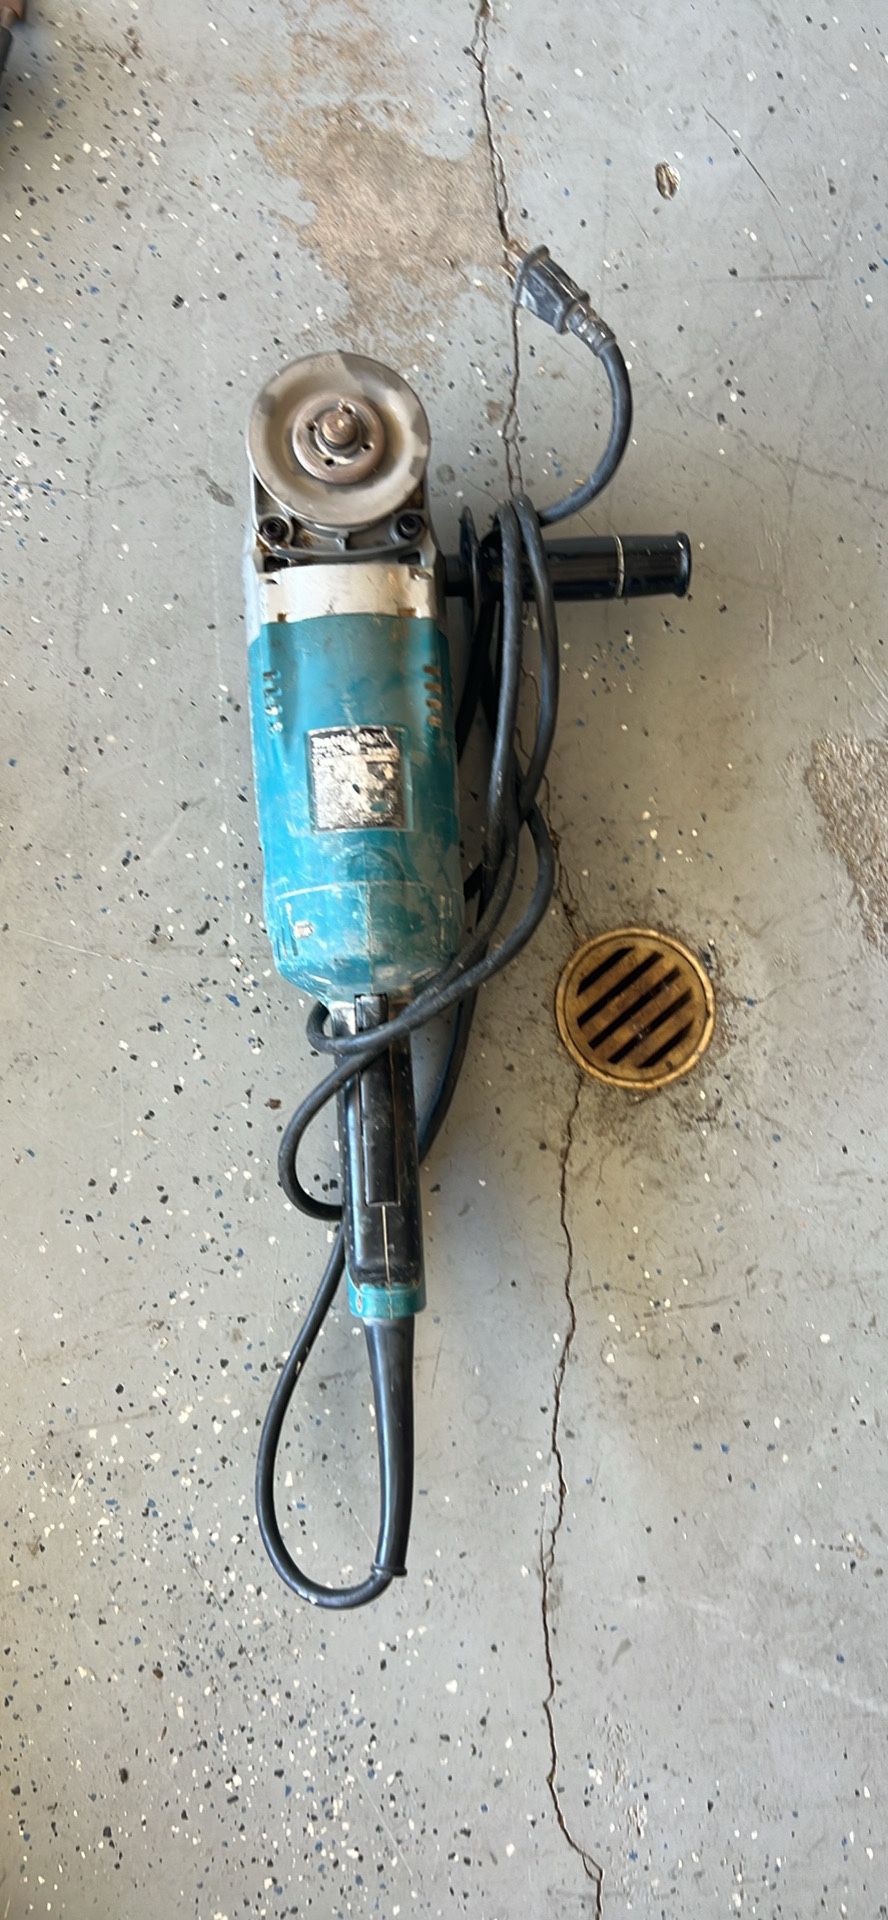 Makita 7” Grinder With Brand New Brushes